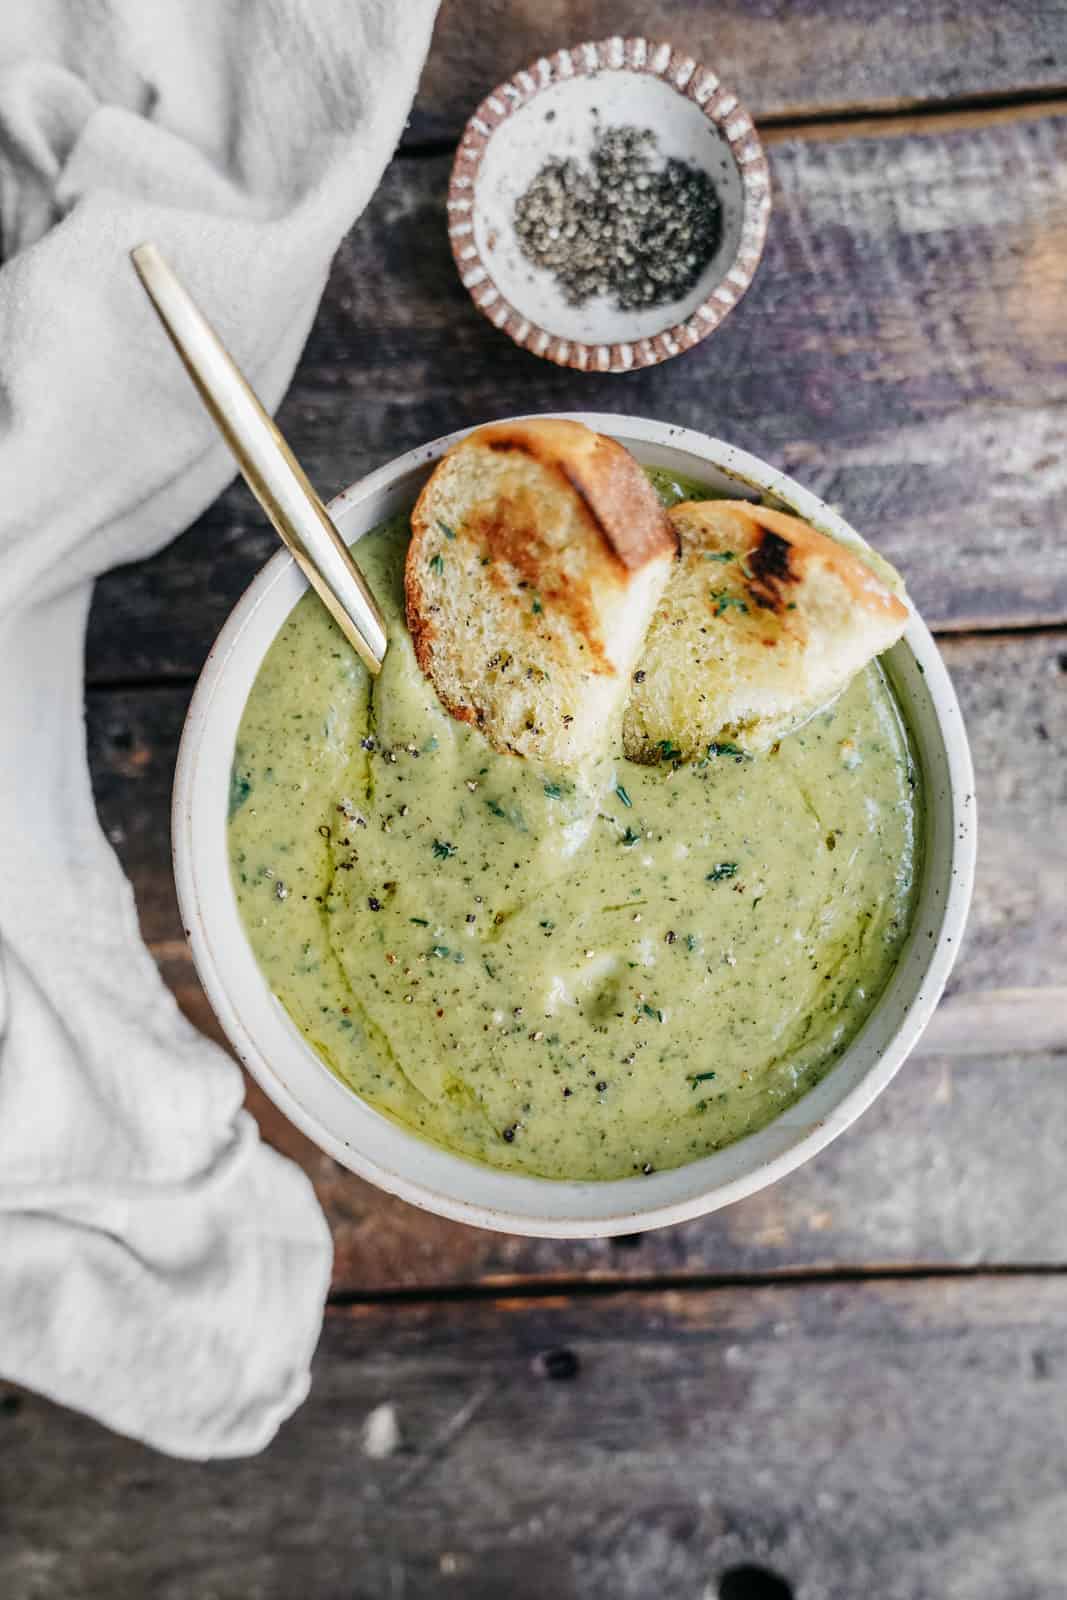 One big creamy bowl of Broccoli Soup ready to eat with a drizzle of olive oil and toasted bread.